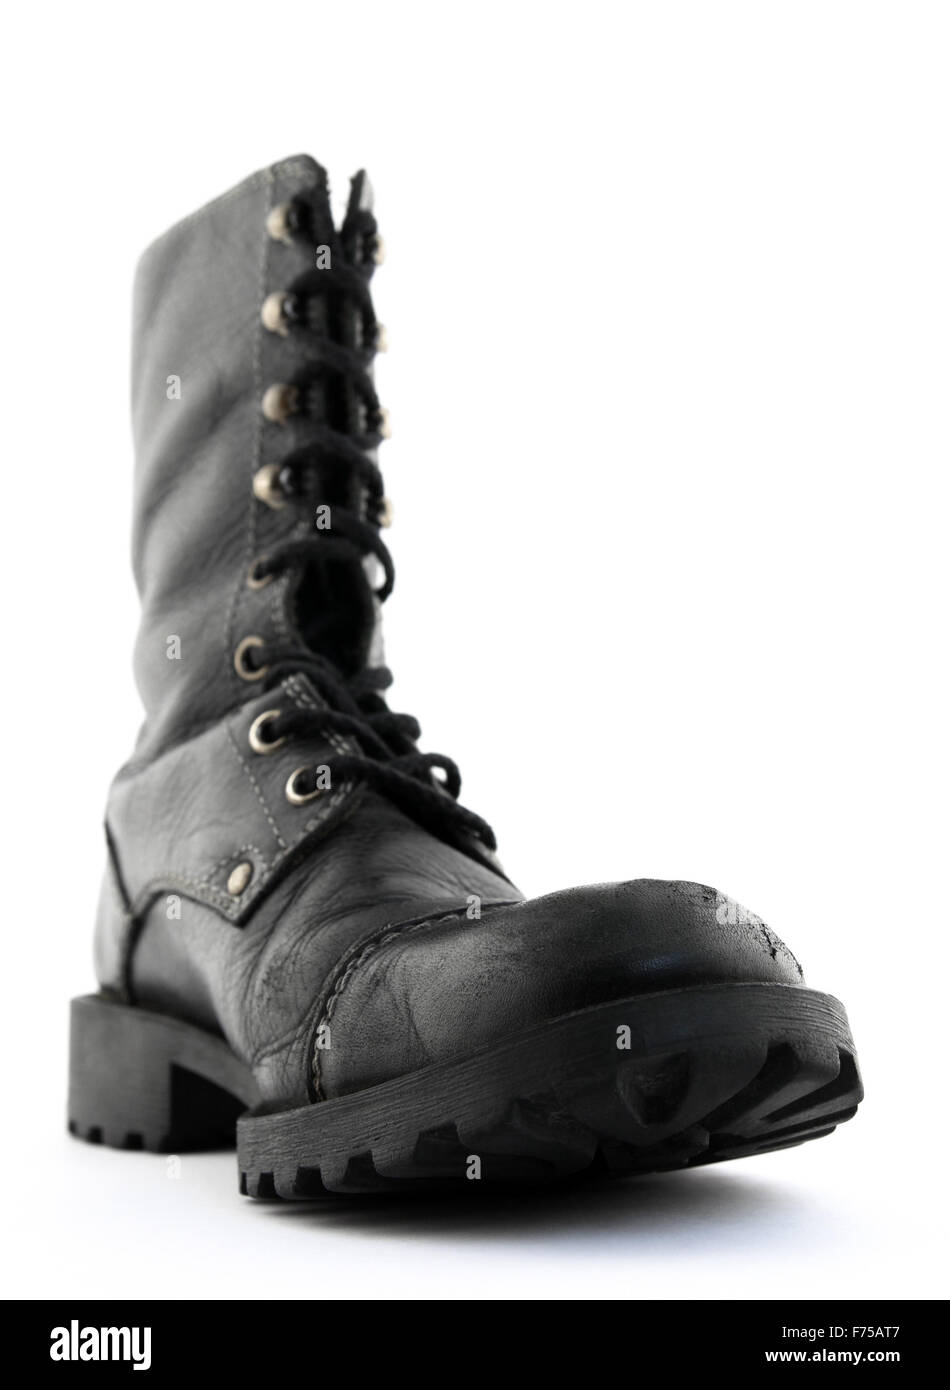 Army style black leather boot Stock Photo - Alamy